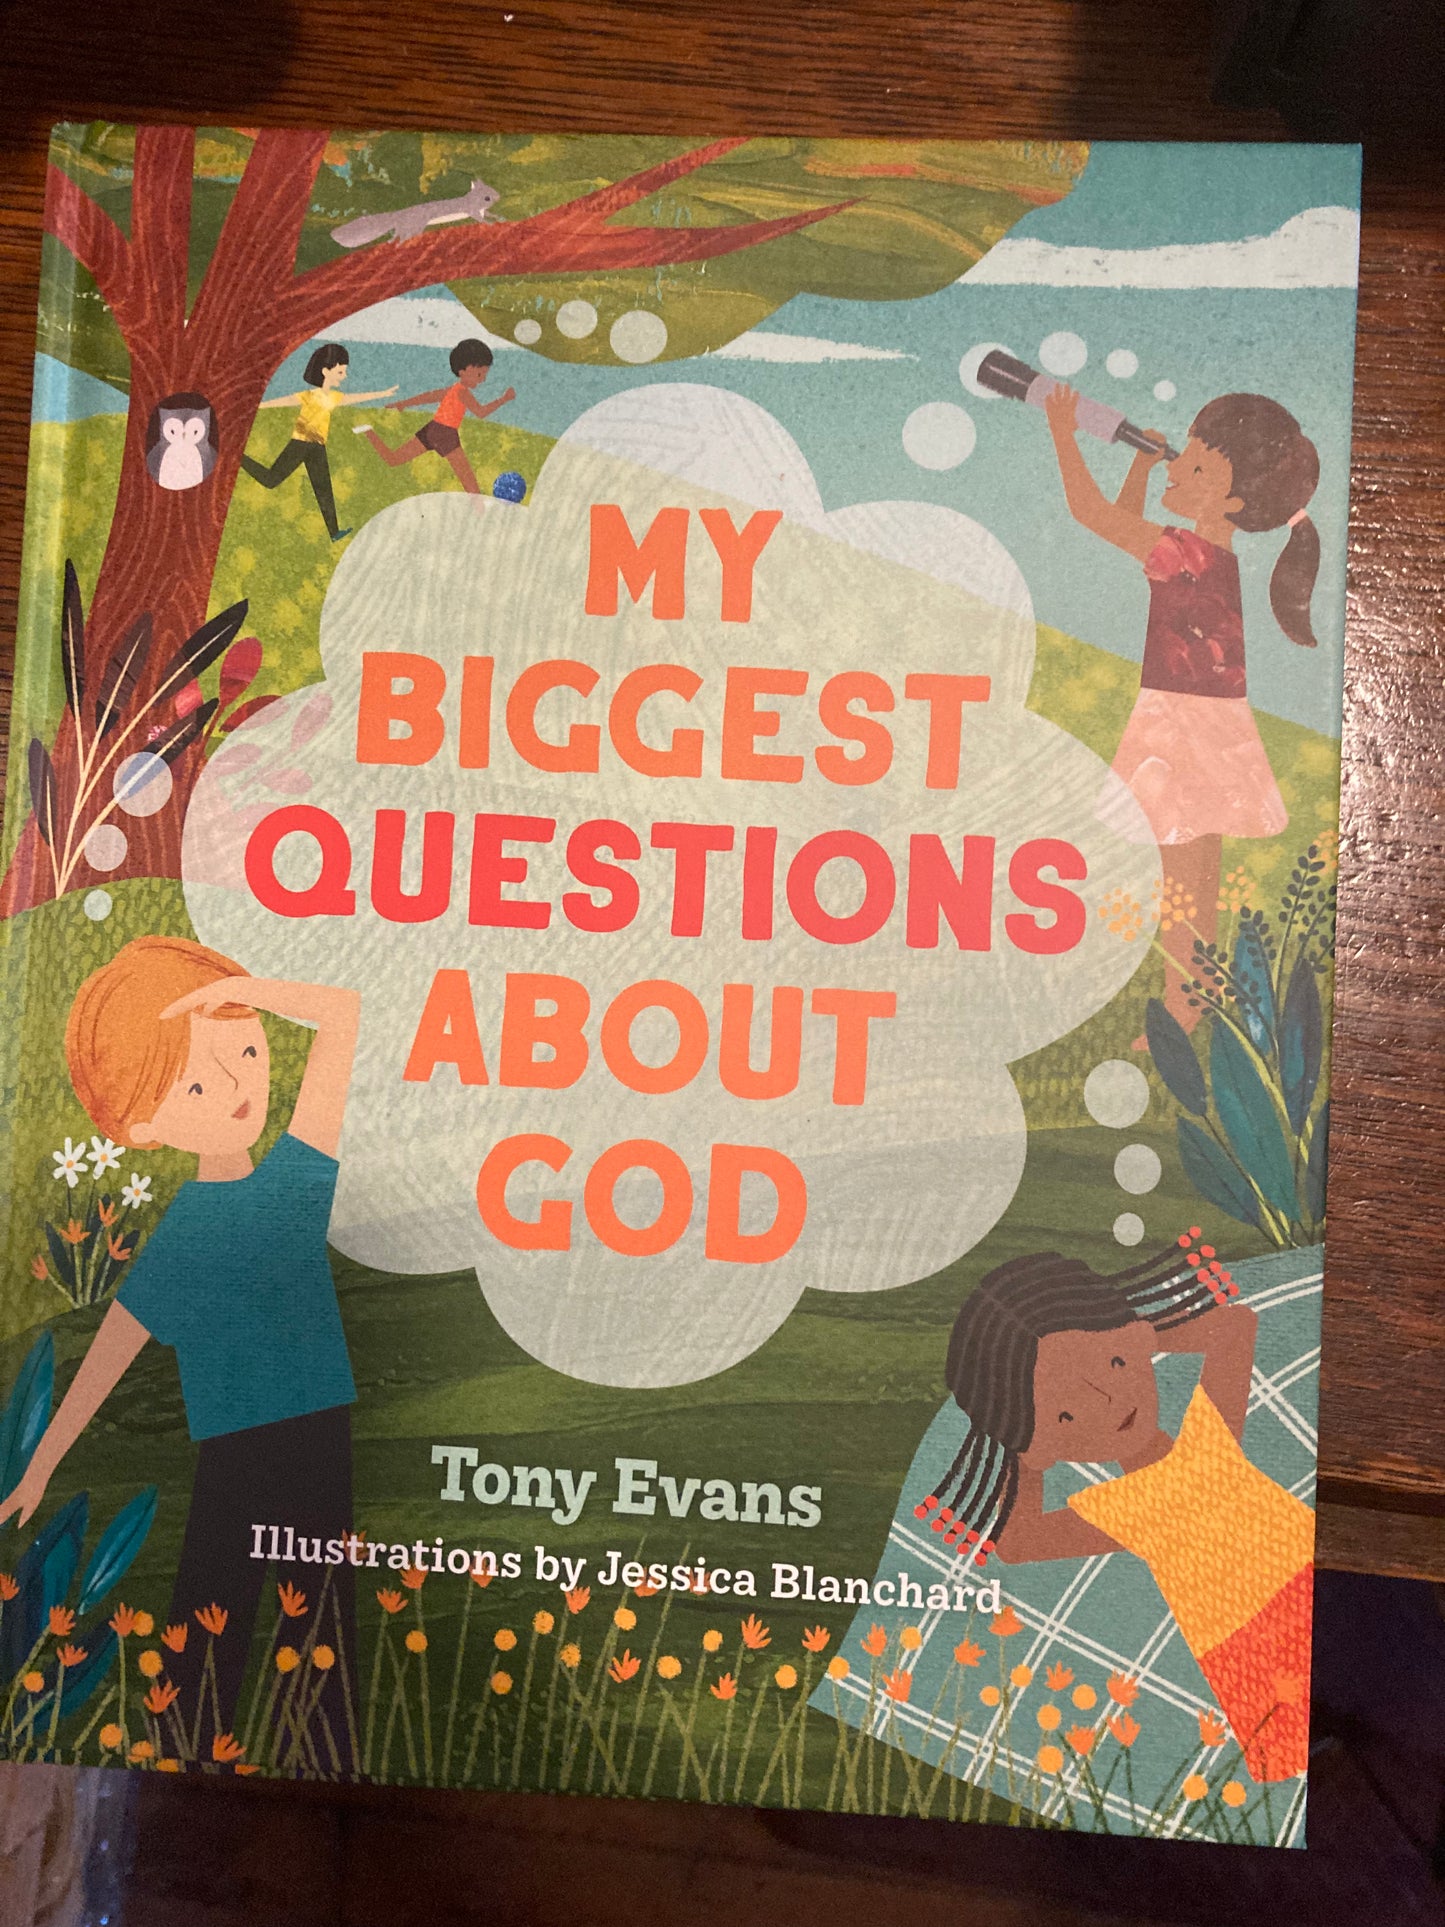 My Biggest Questions About God